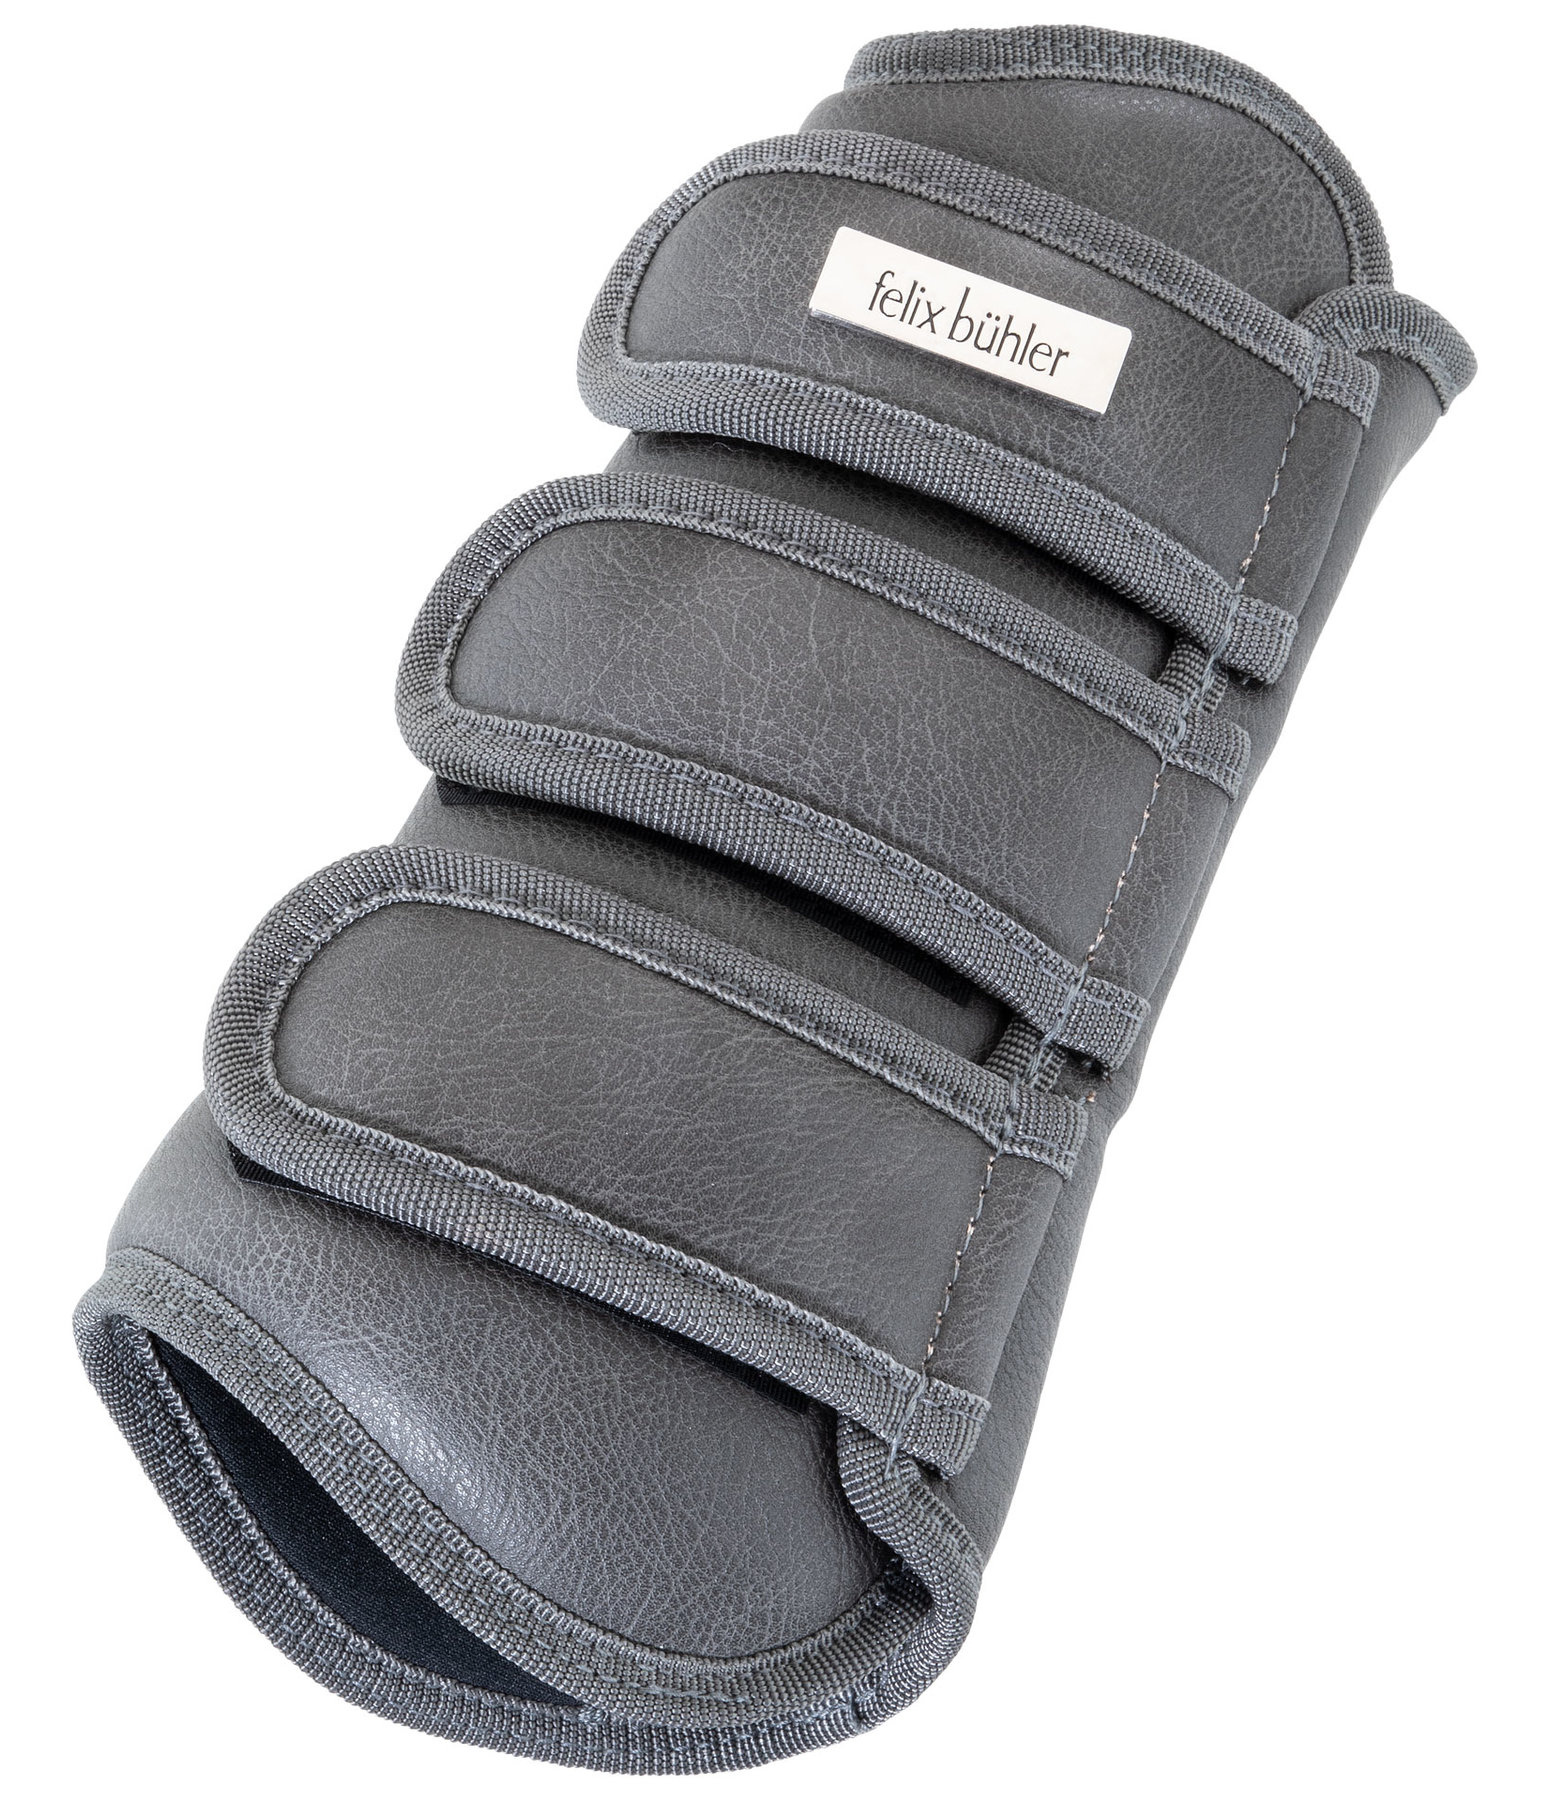 Dressage Boots Passage II with TPU Brushing Protection, front legs